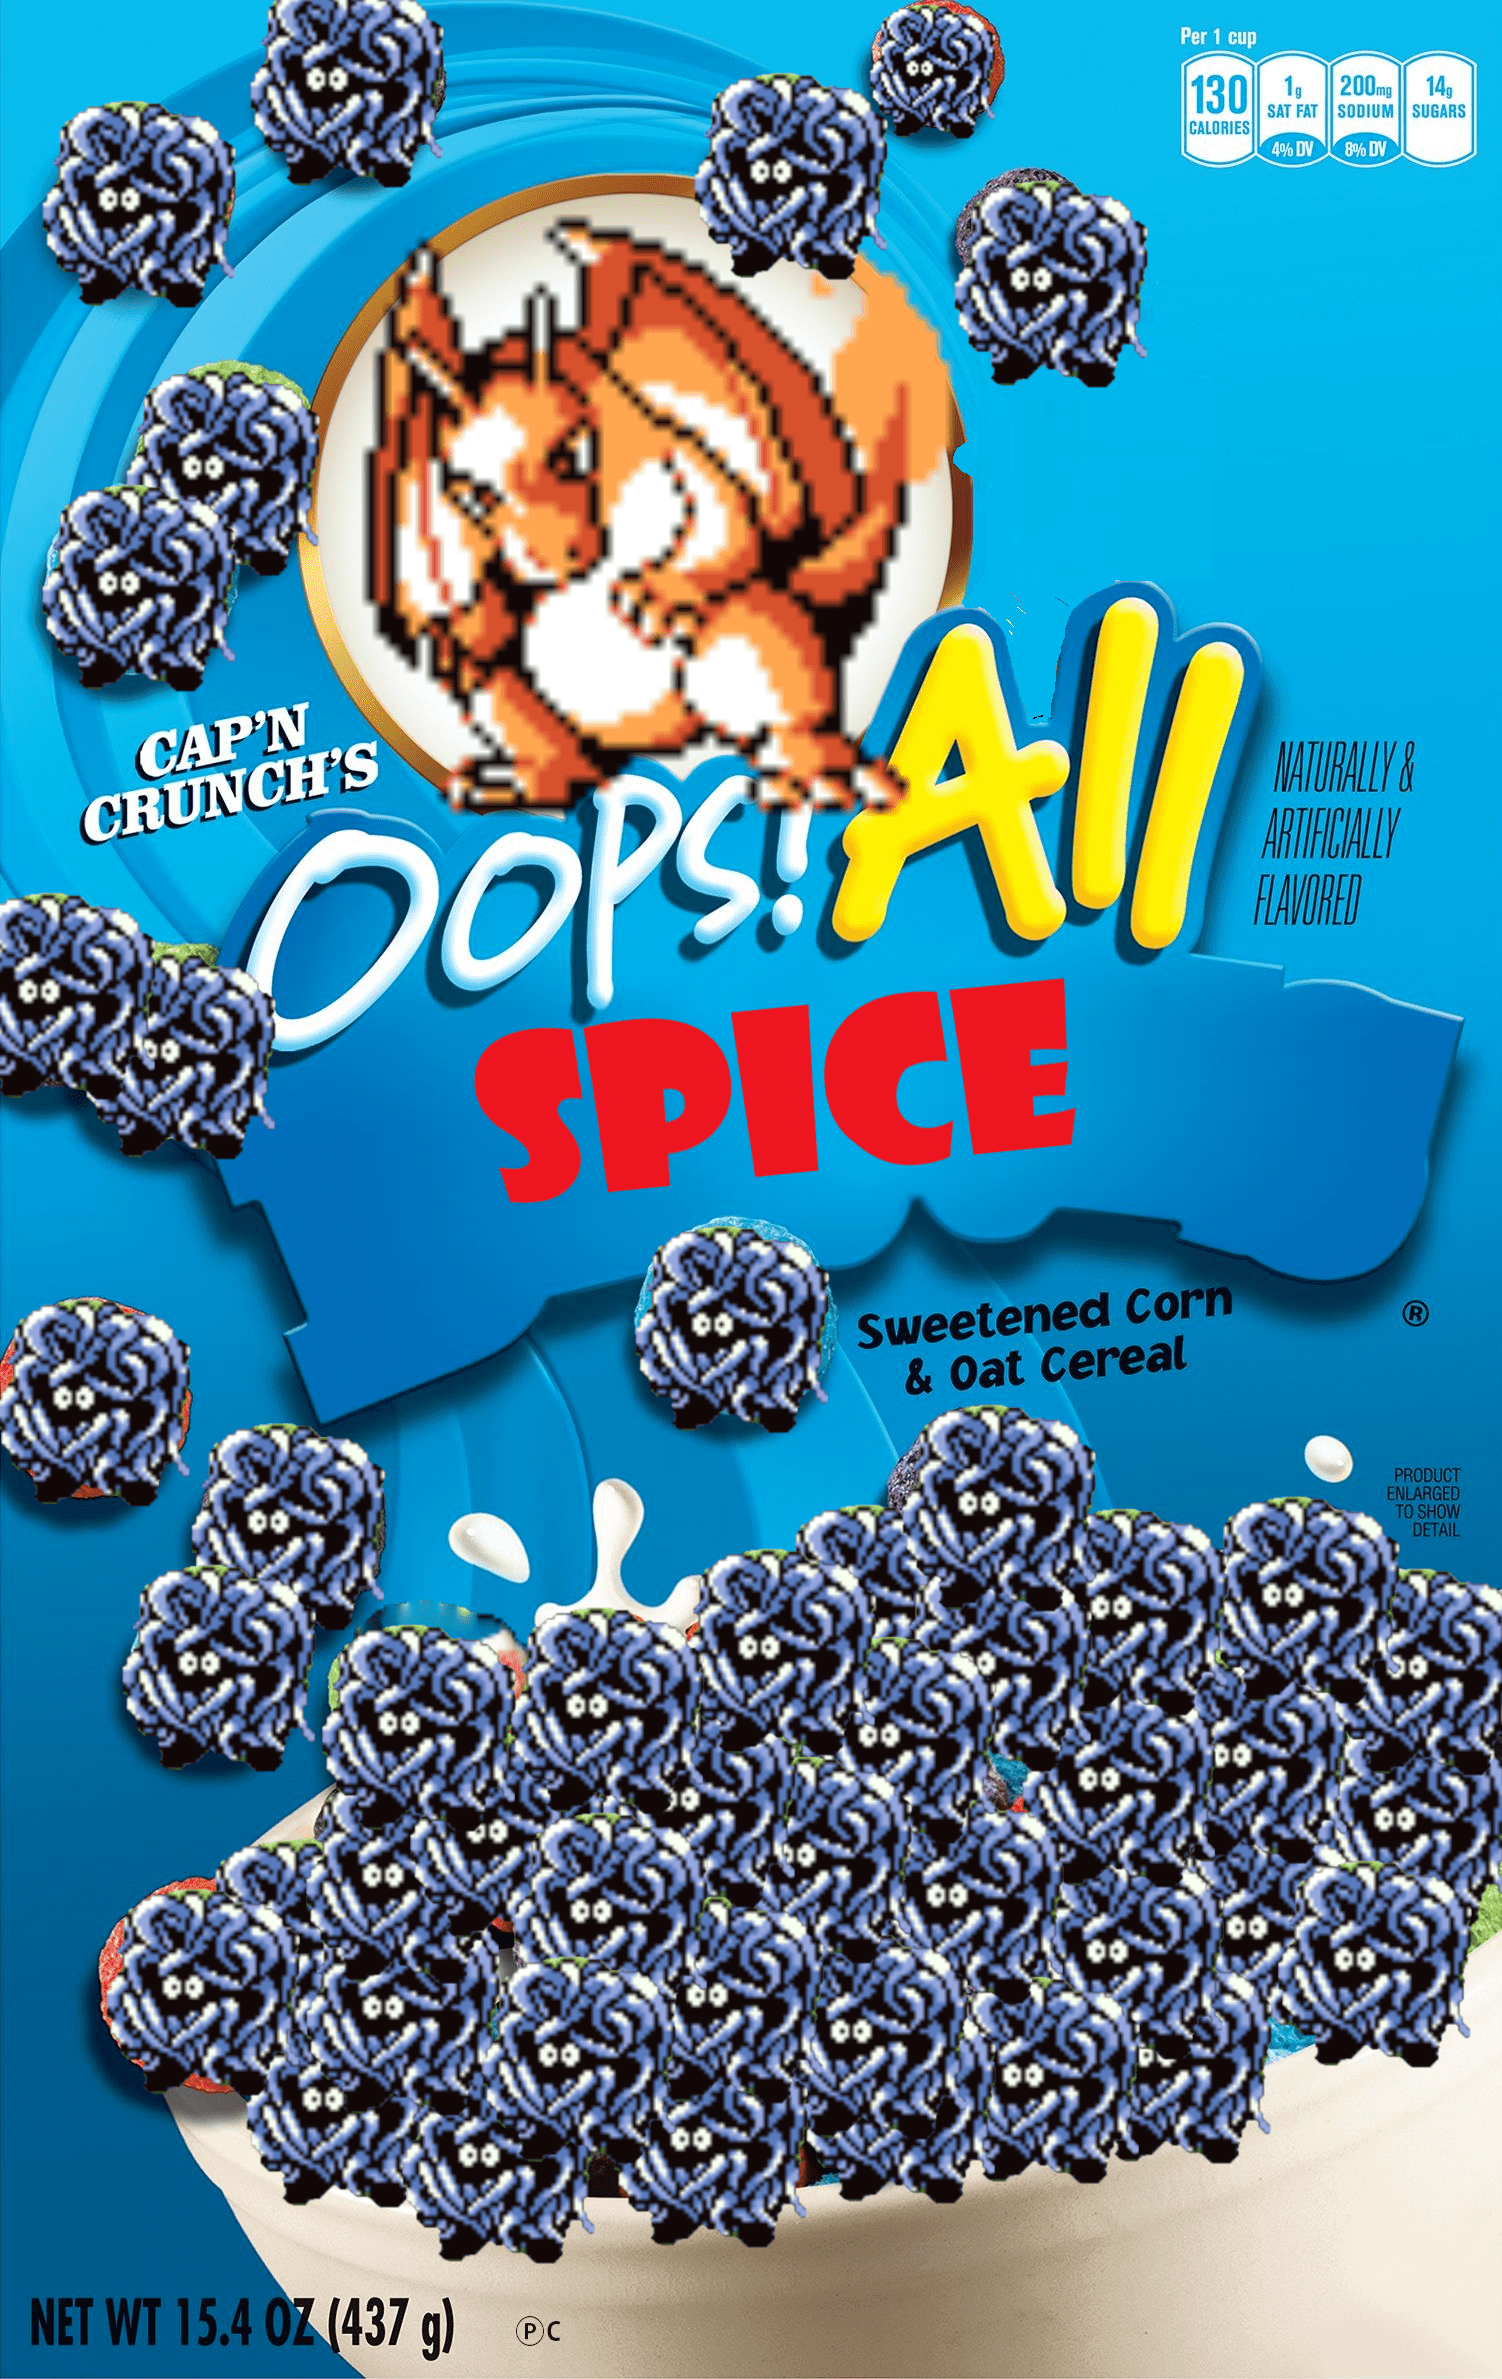 Oops! All Spice (1).png